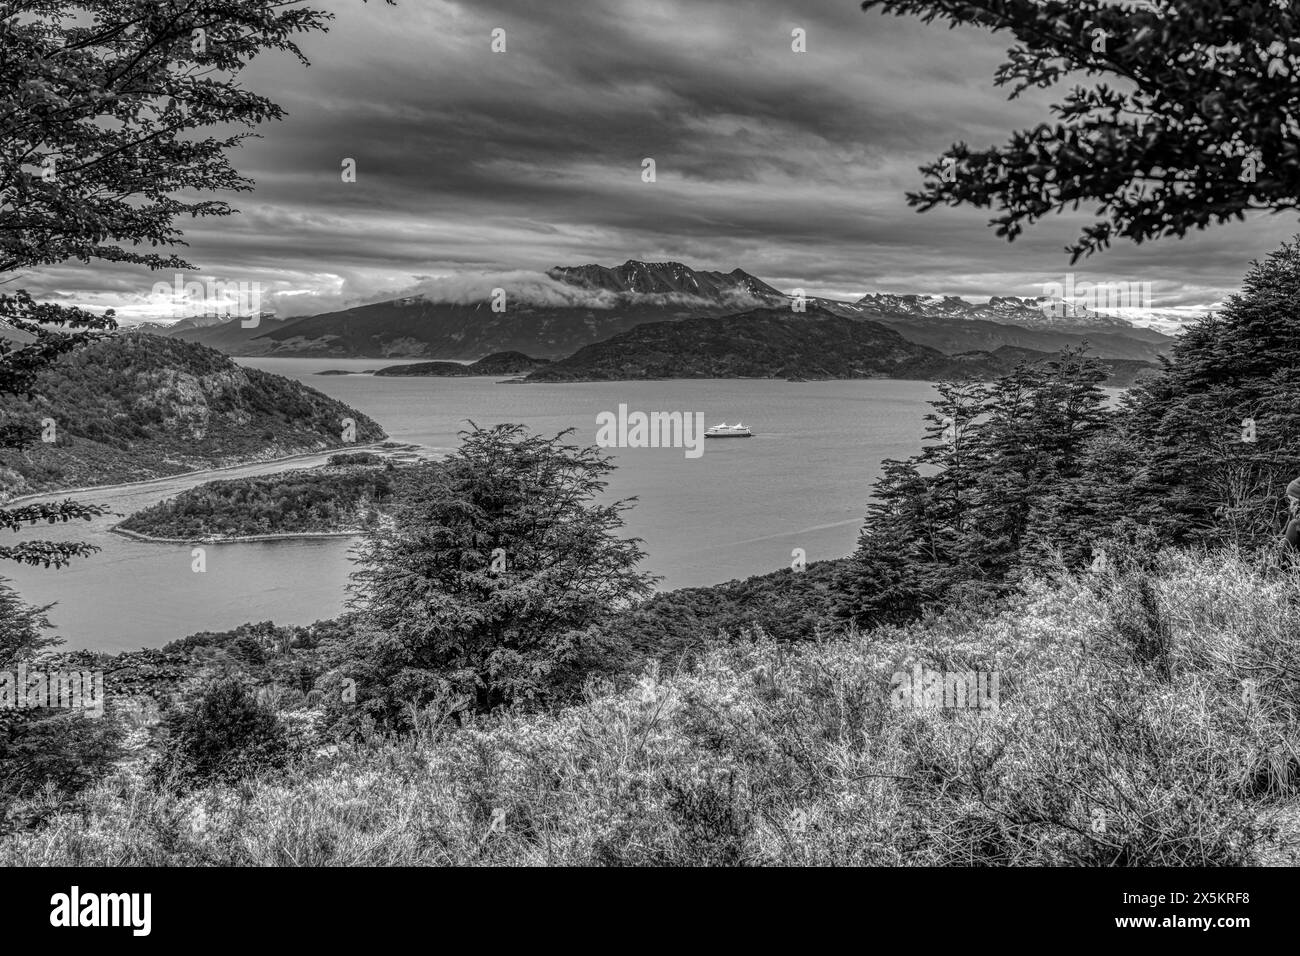 Argentina, Tierra del Fuego National Park. Black and white panoramic of tourist boat in Wailua Bay. Stock Photo